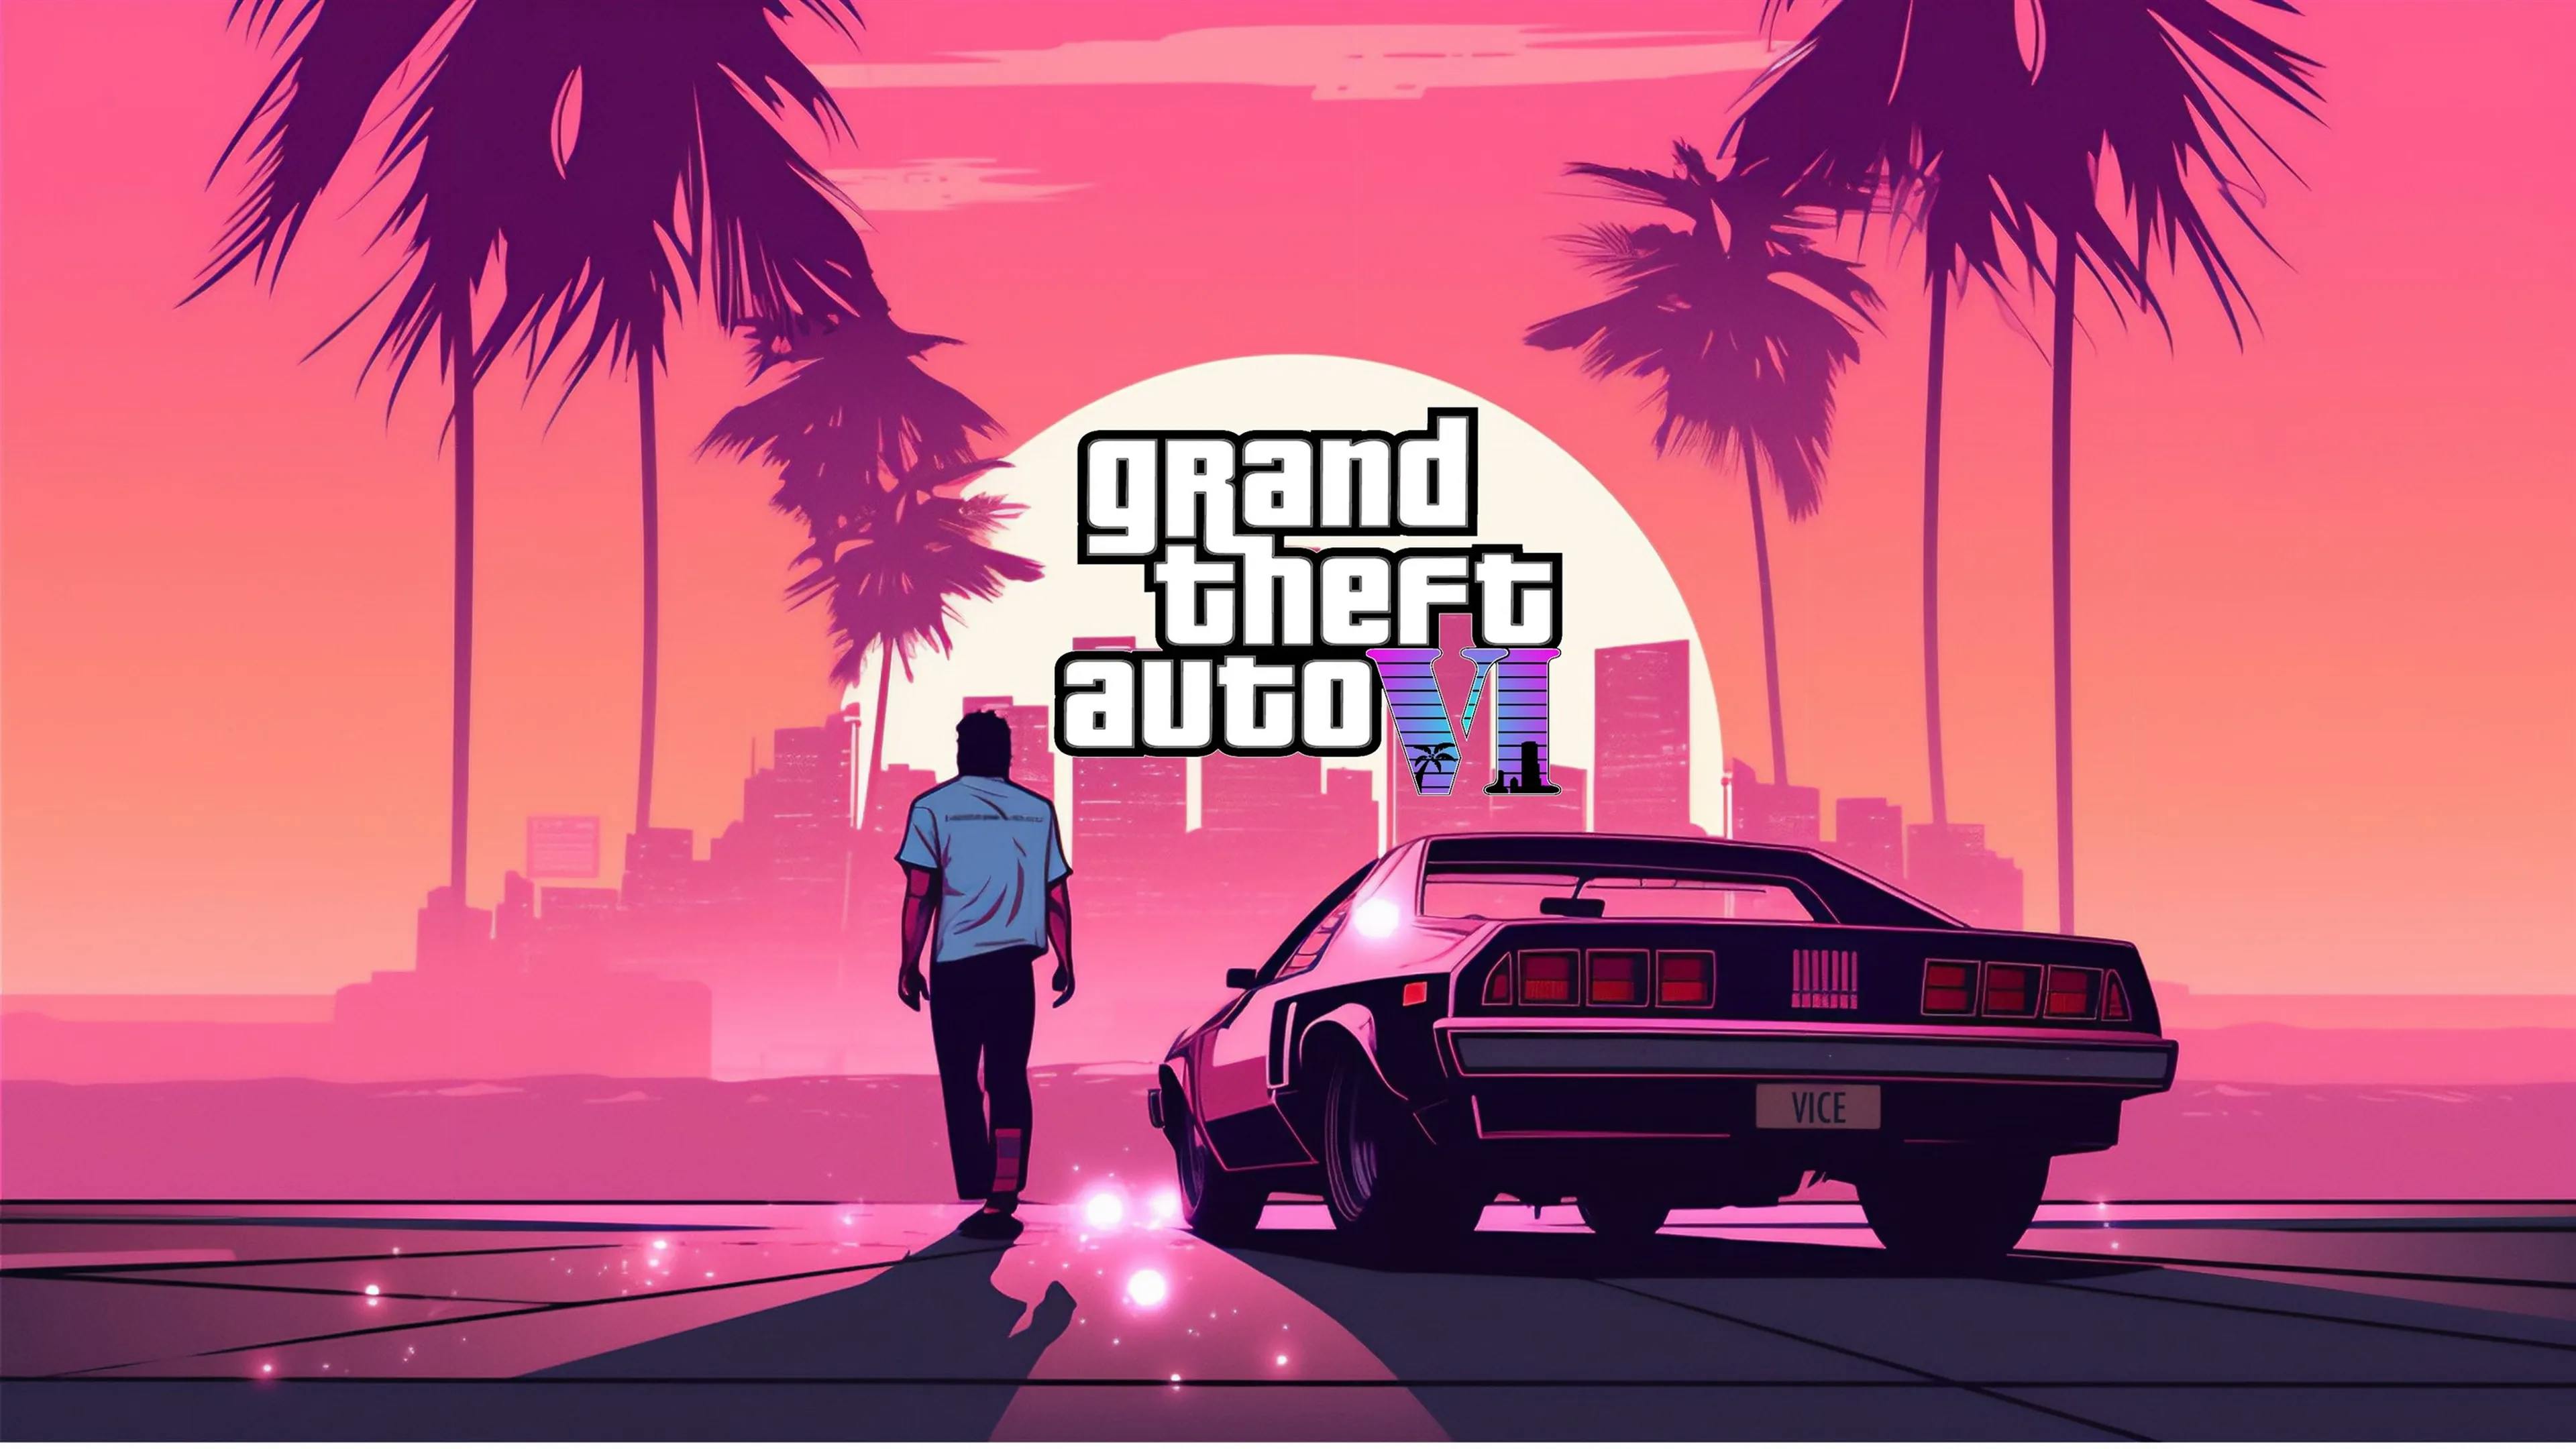 Cover Image for GTA 6 Map Leak: What We Know So Far About the Expansive Landscape